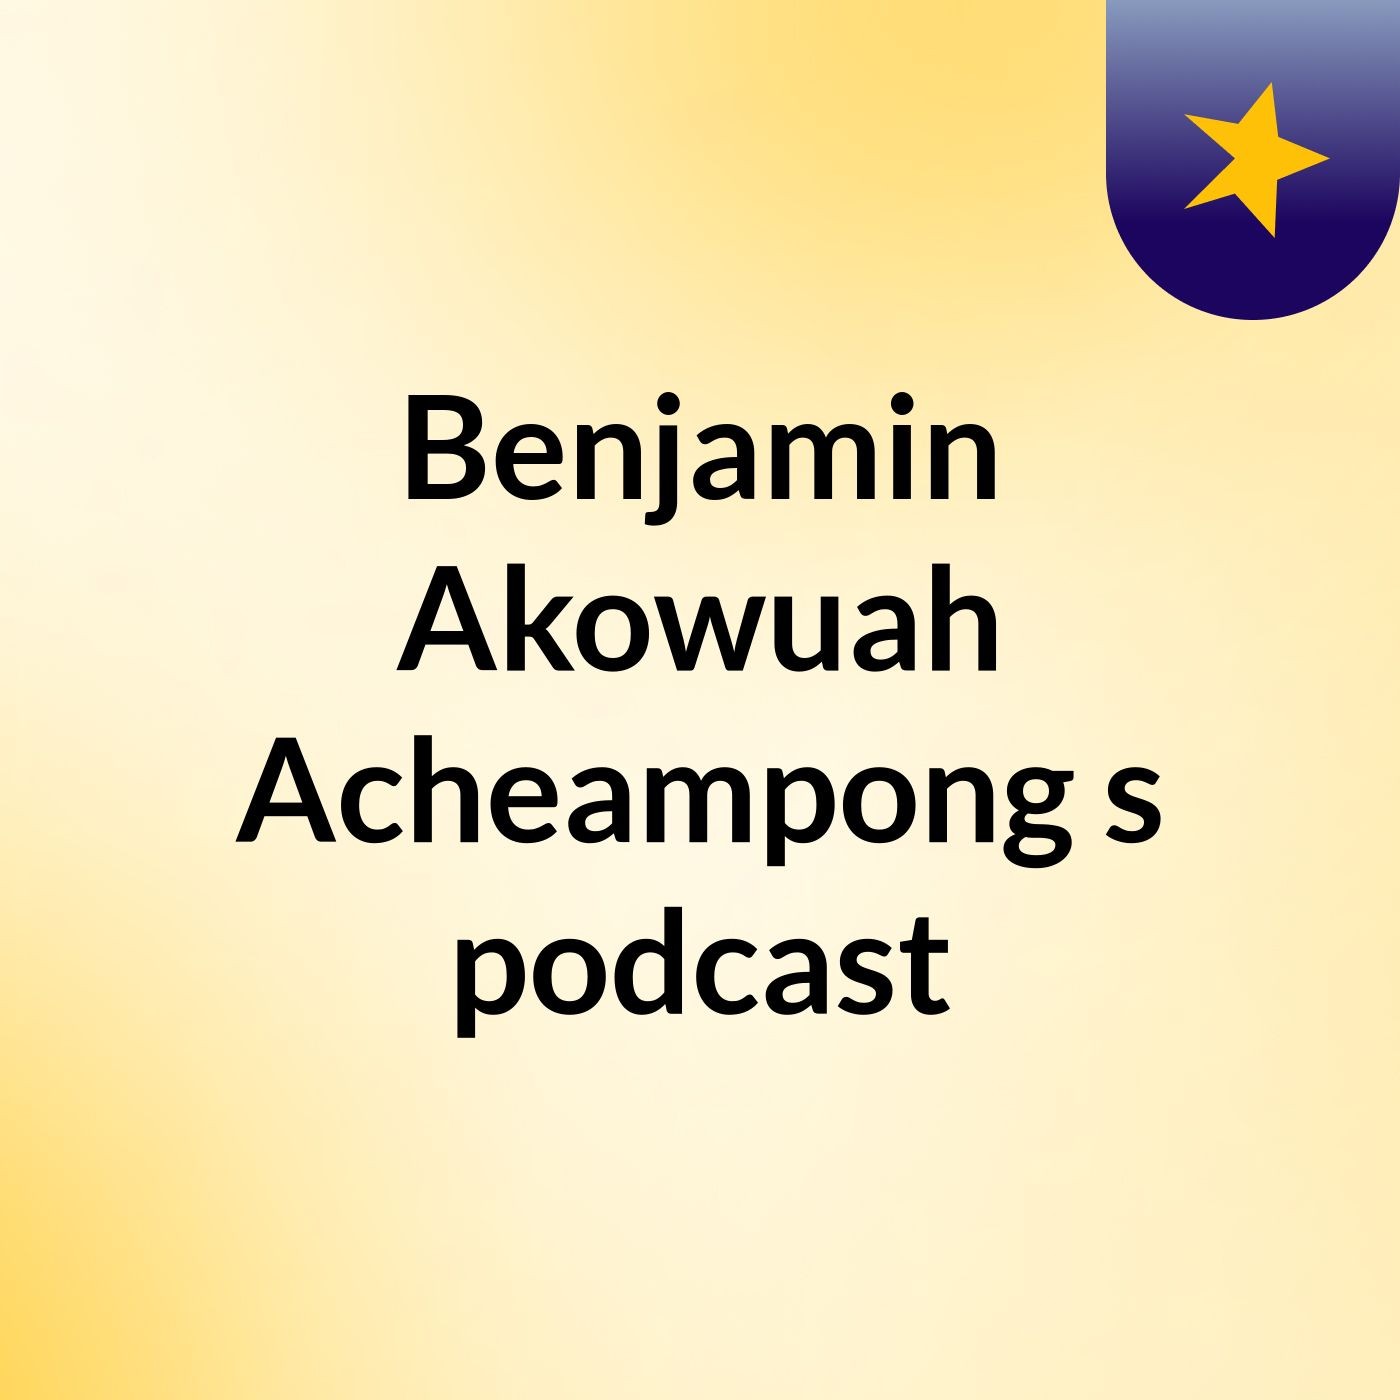 Episode 4 - Benjamin Akowuah Acheampong's podcast